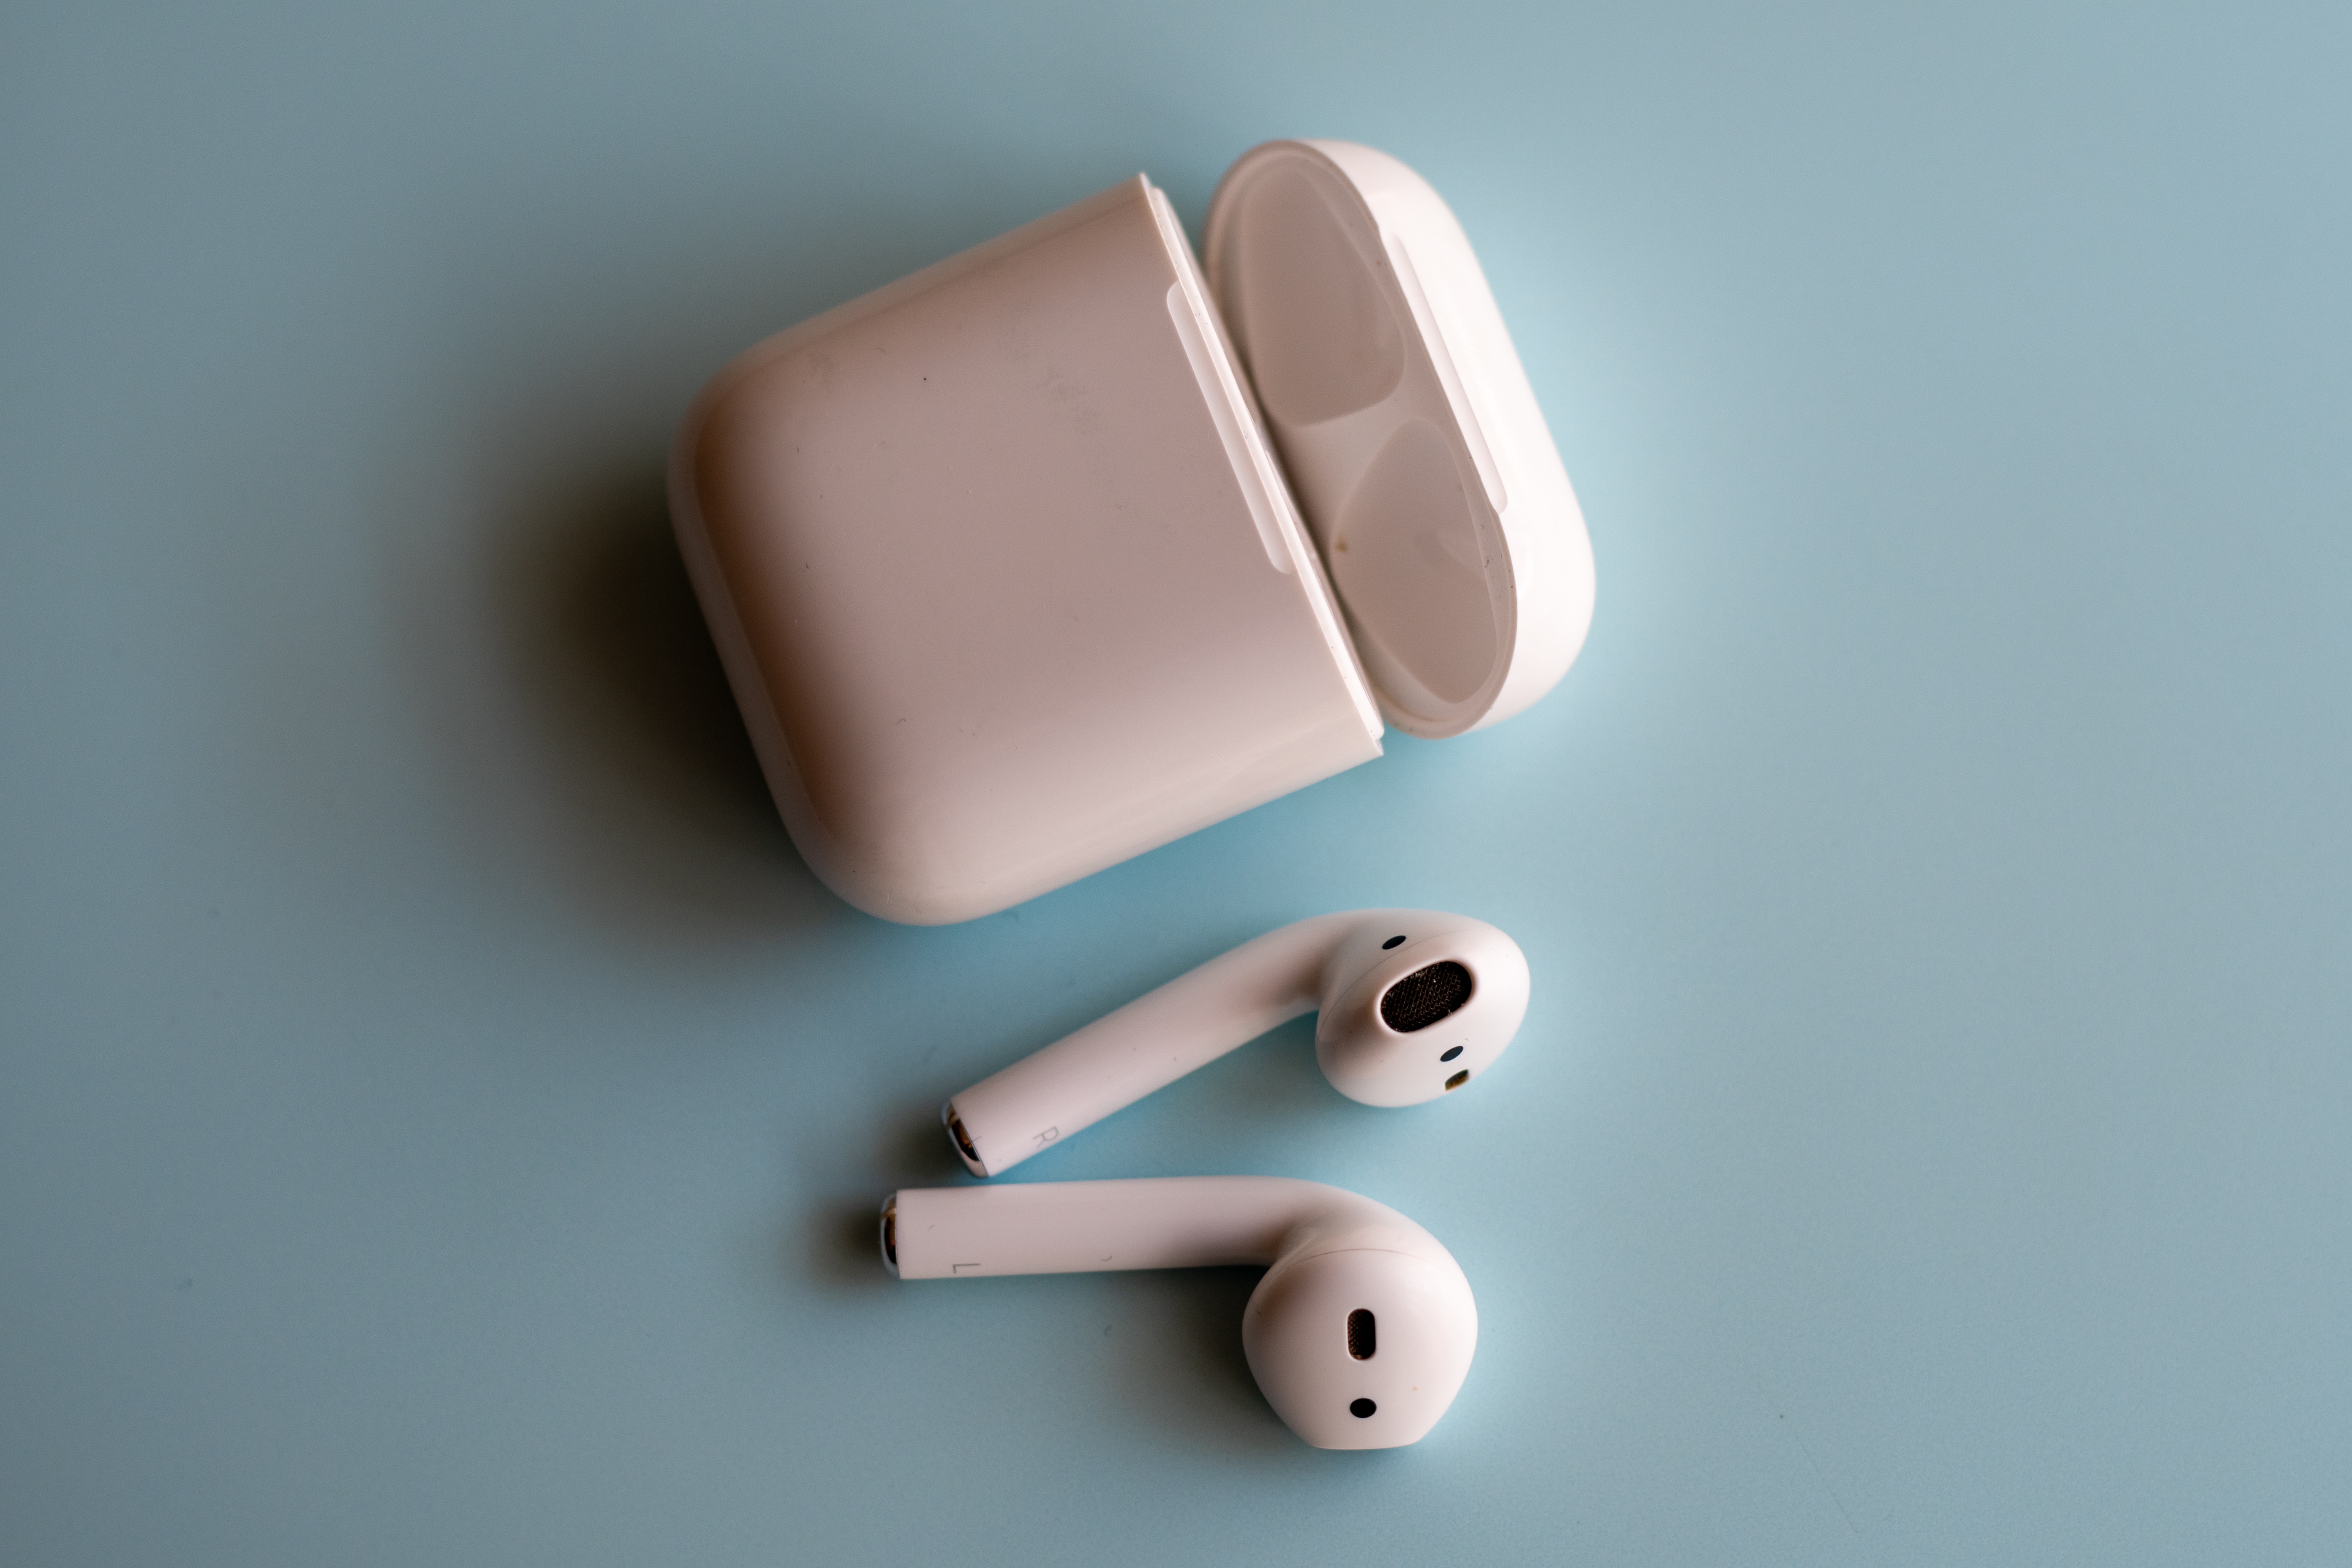 airpods-get-hot-when-wireless-charging